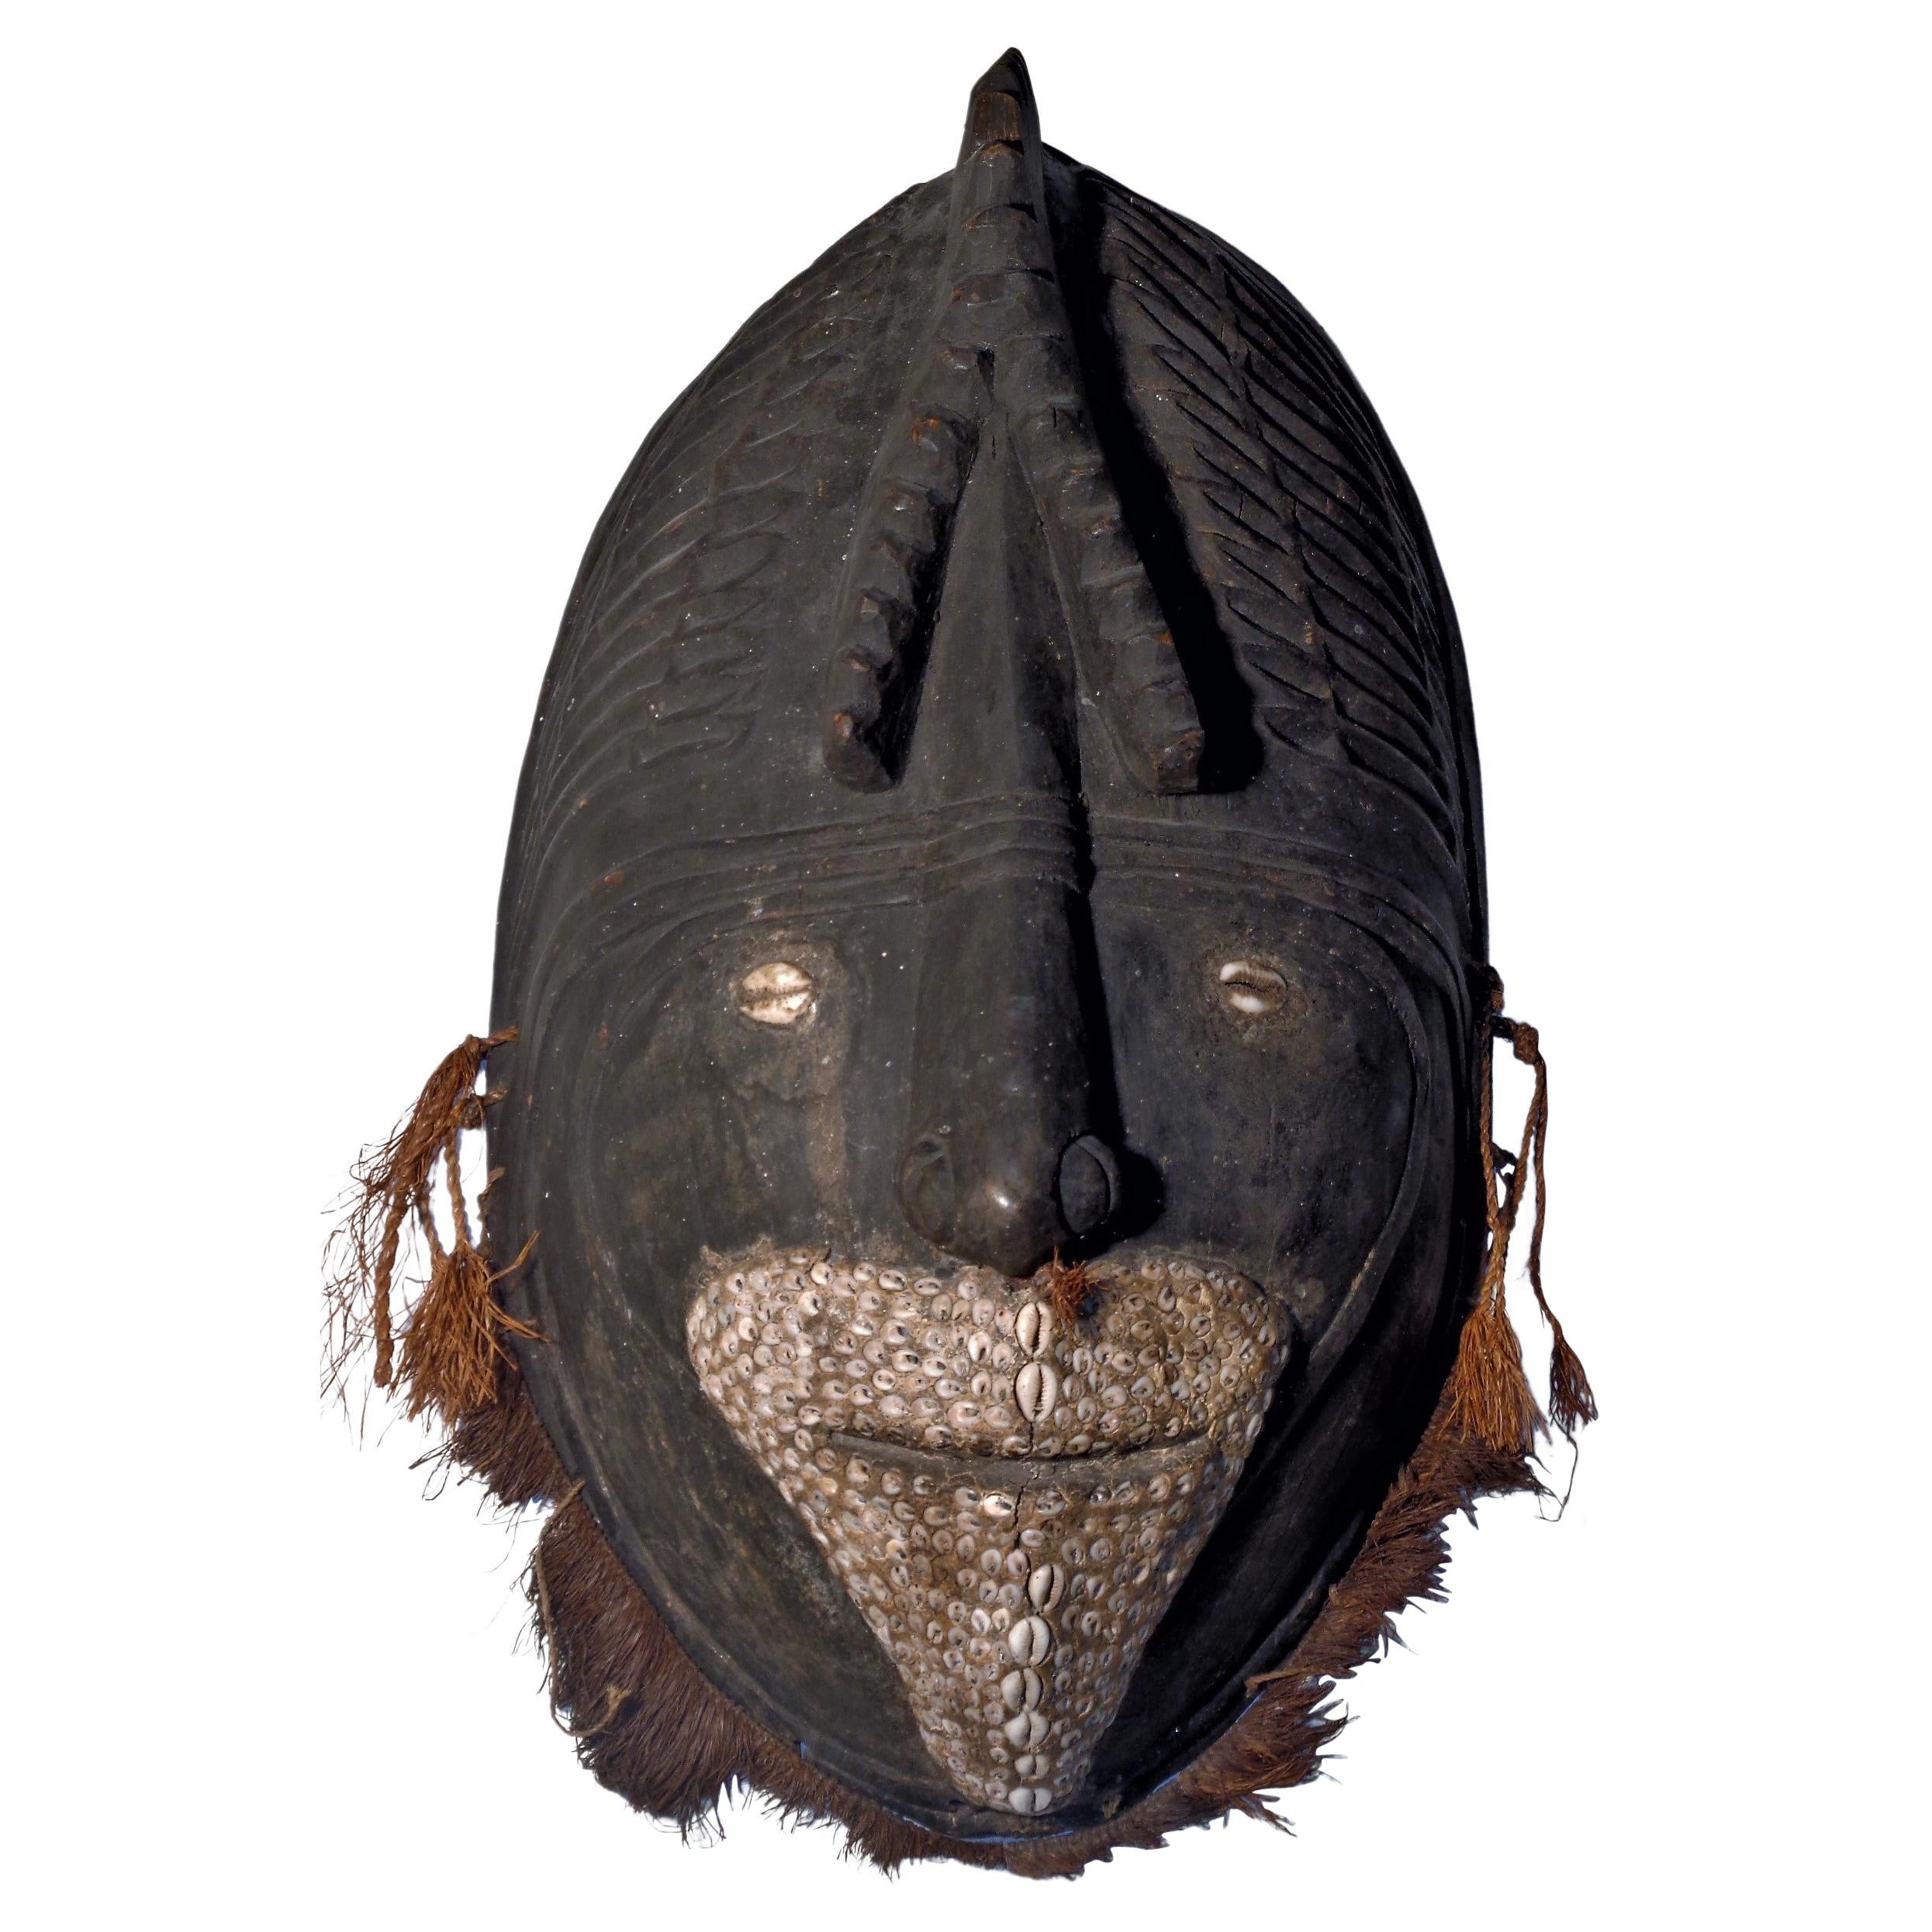 Biwat People Ancestral Mask Papua New Guinea, Circa 1980 For Sale